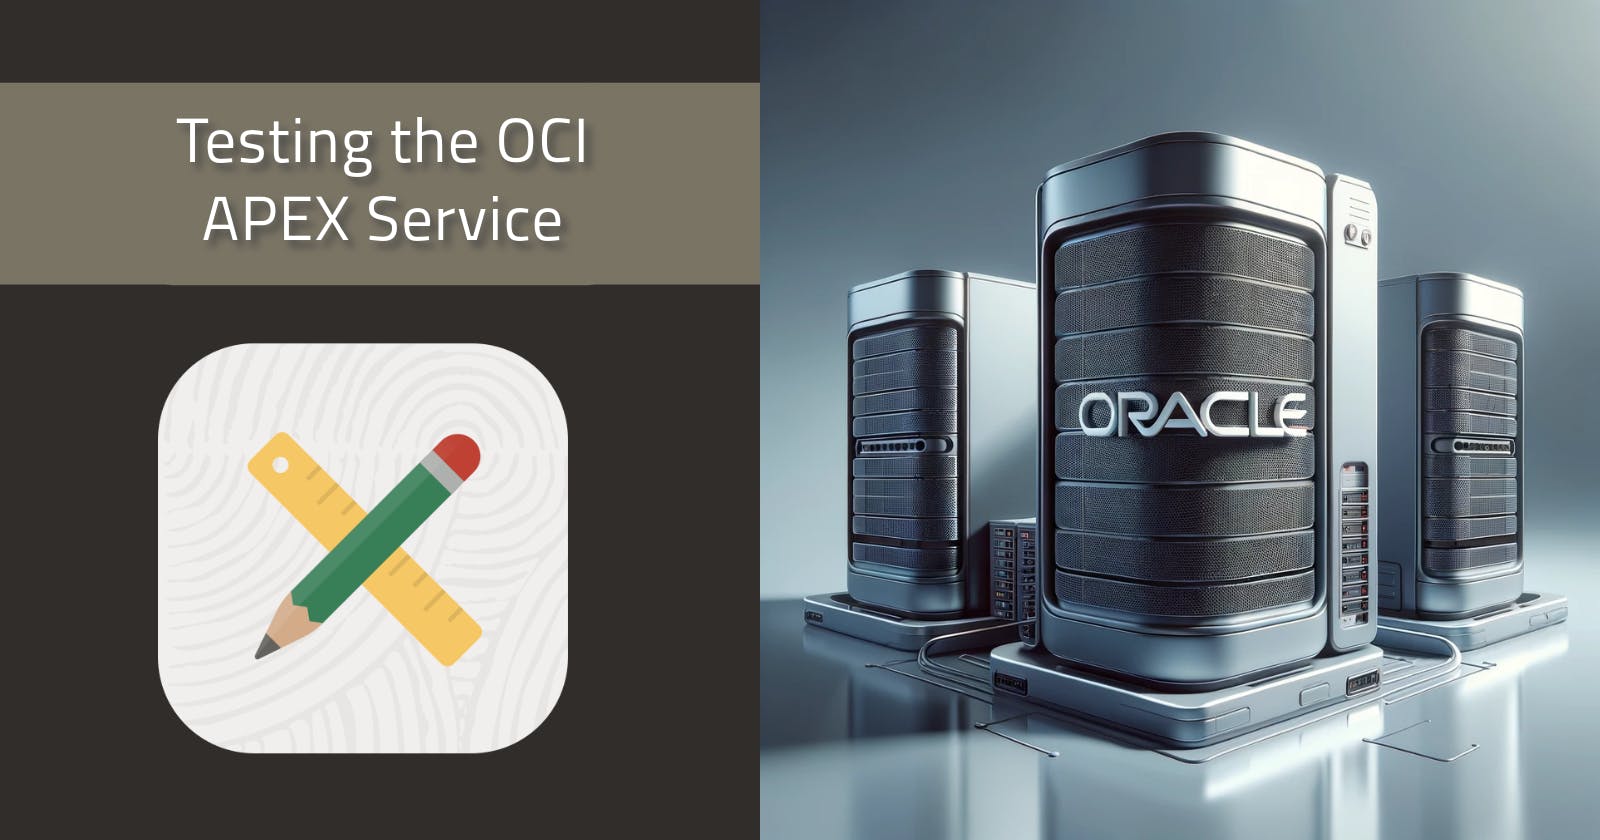 Testing the Oracle OCI APEX Service